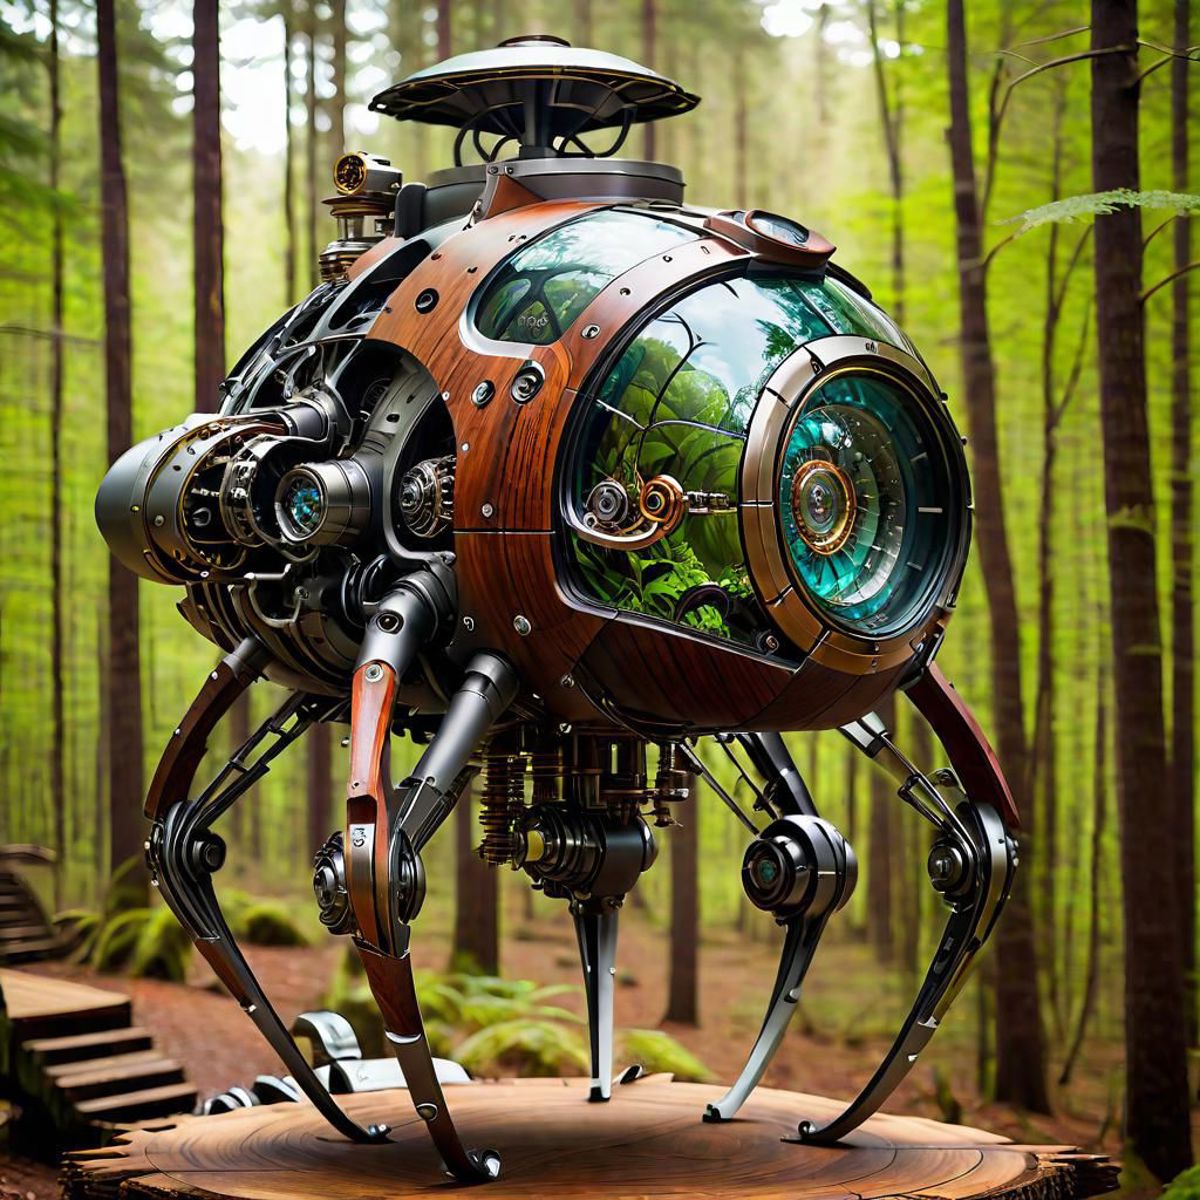 A robotic sculpture made from wood and metal in a forest setting.